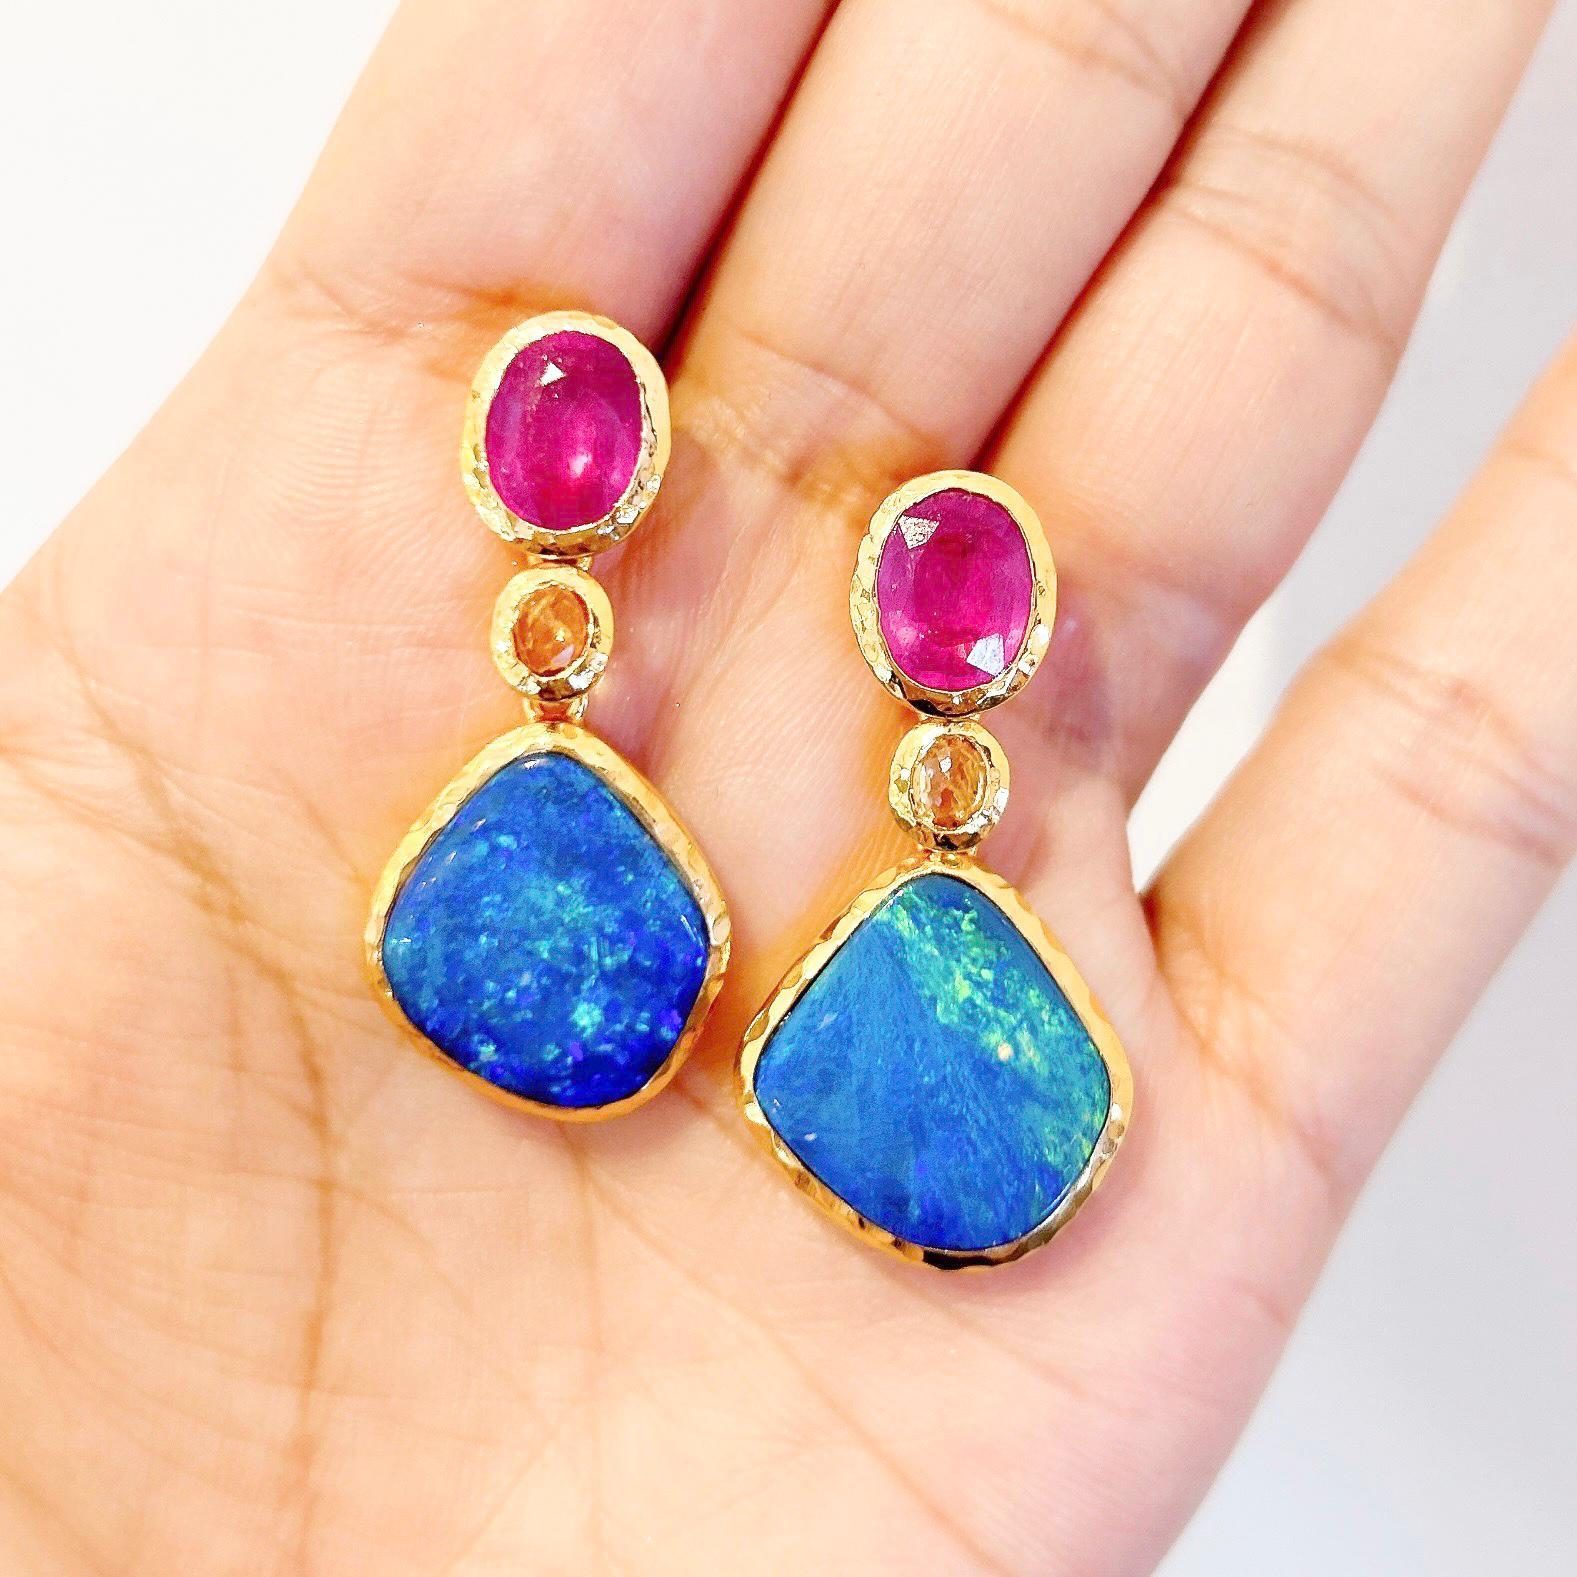 Bochic “Capri” Blue Opal, Ruby, Sapphire Earrings Set in 22k Gold & Silver In New Condition For Sale In New York, NY